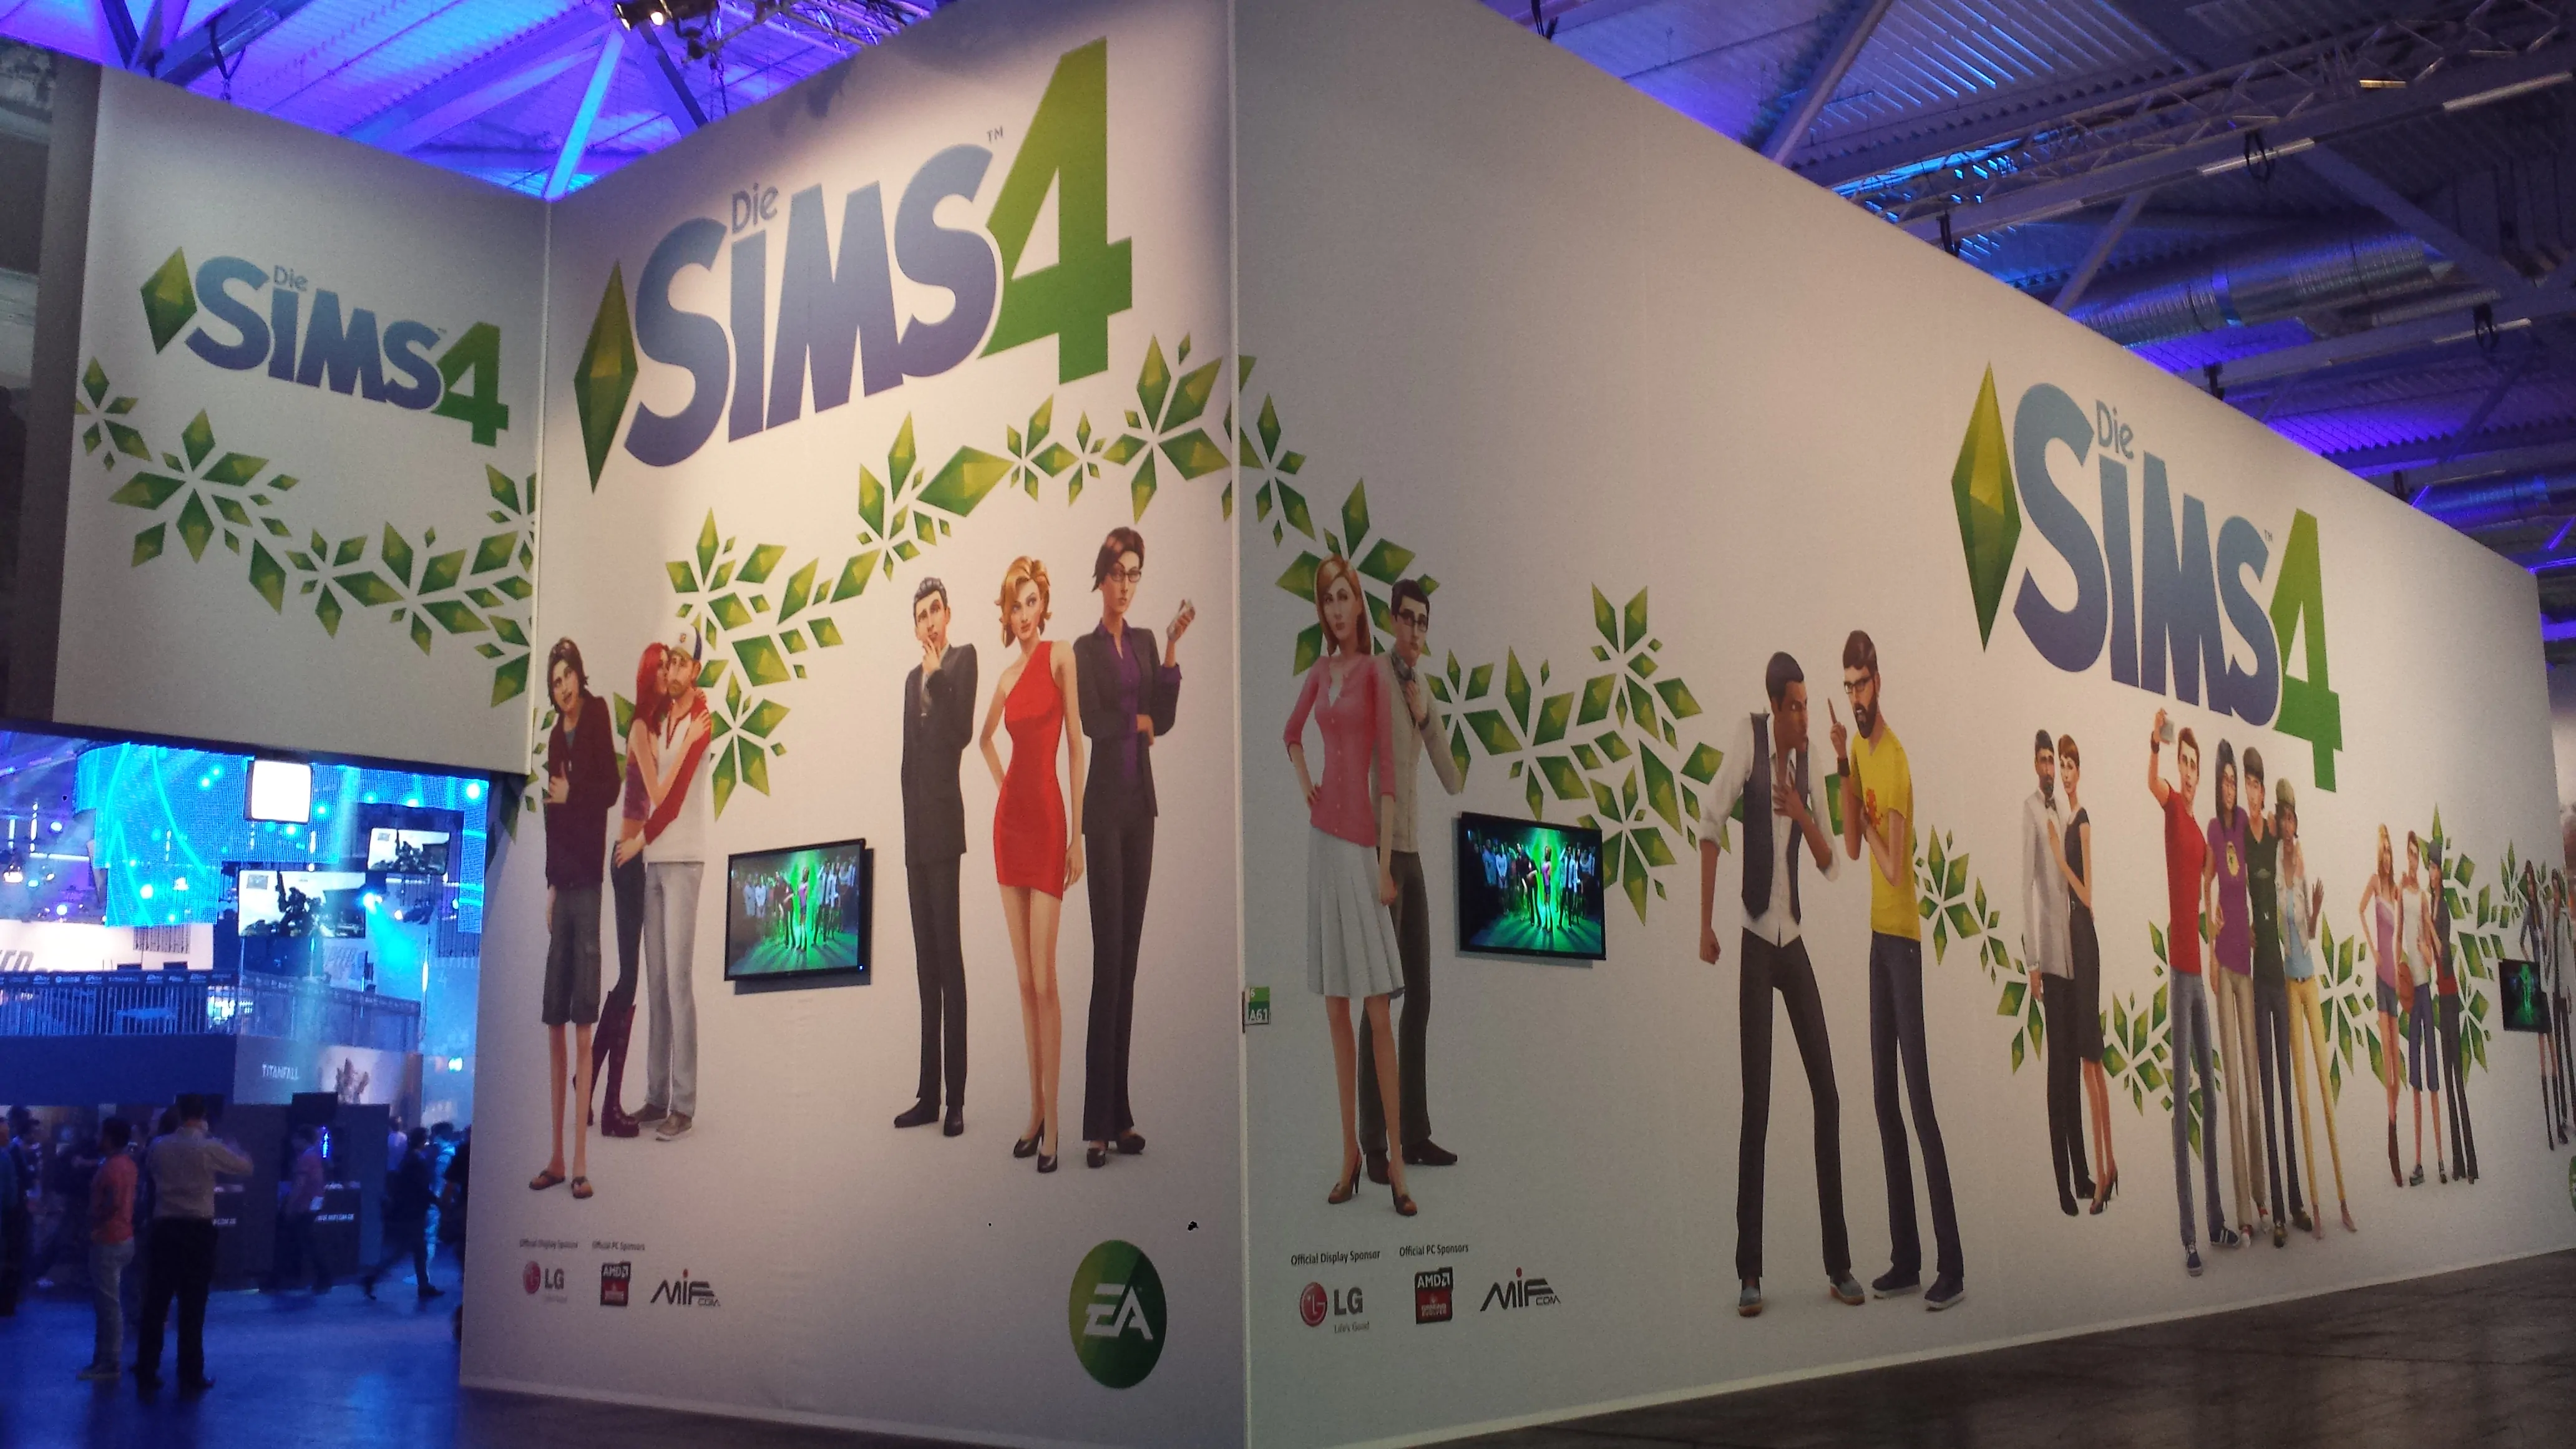 The Sims 4 section   Gamescom 2013